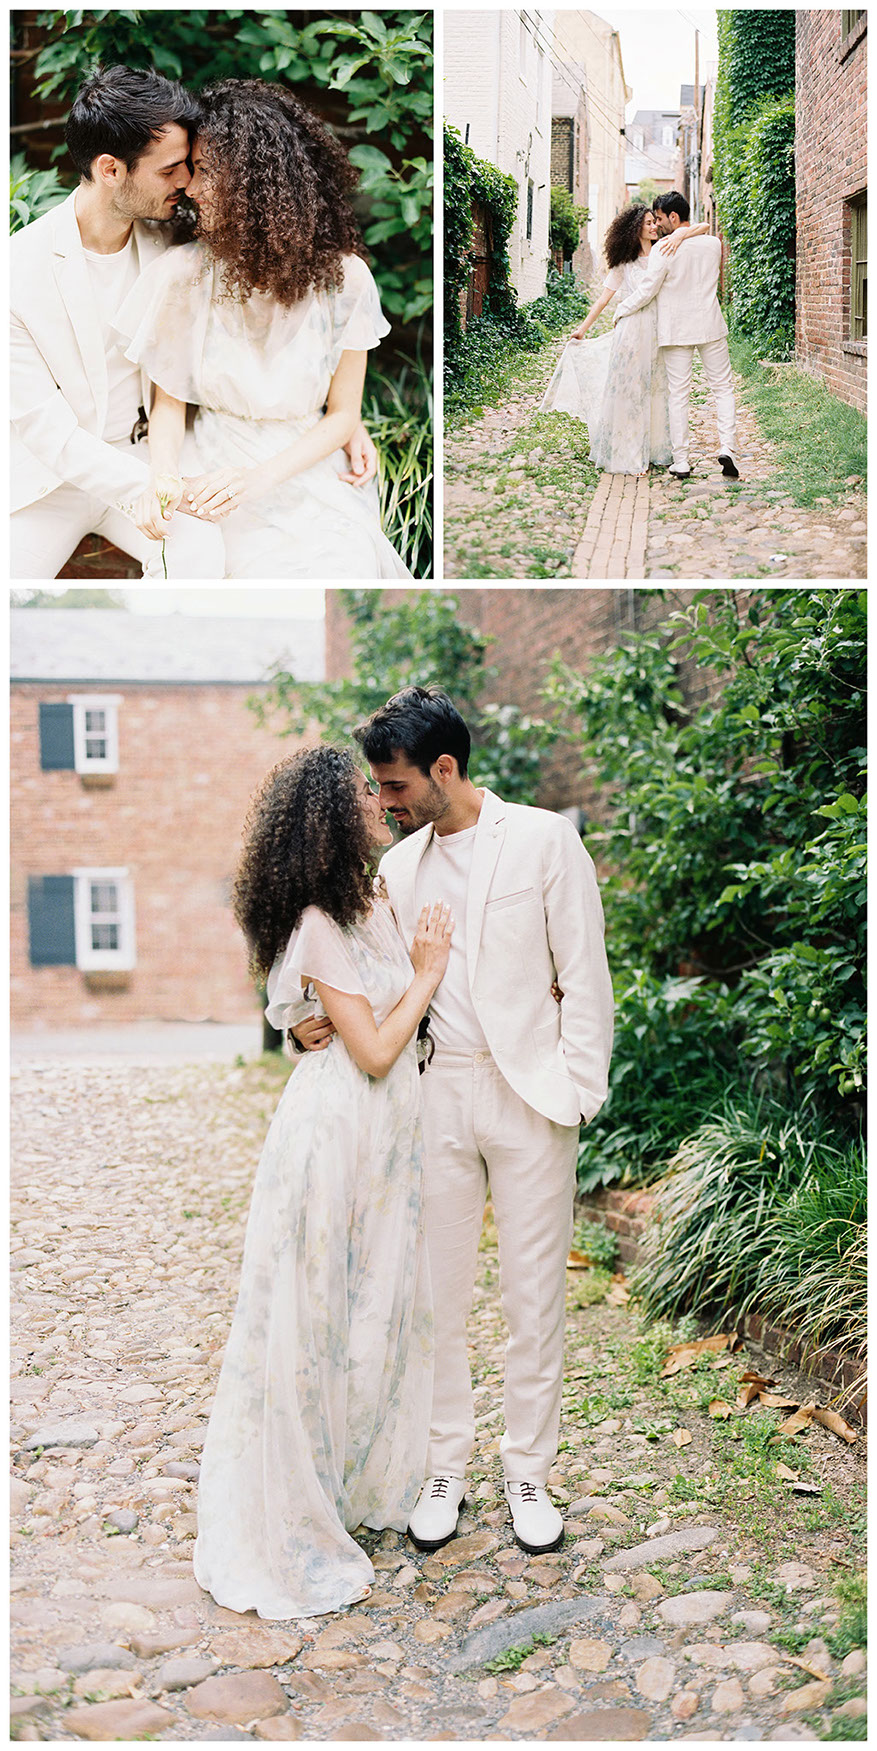 Old Town Alexandria,  Engagement Session Captured on Film.  Published on Washingtonian Bride and Groom. Snowdrop Photography